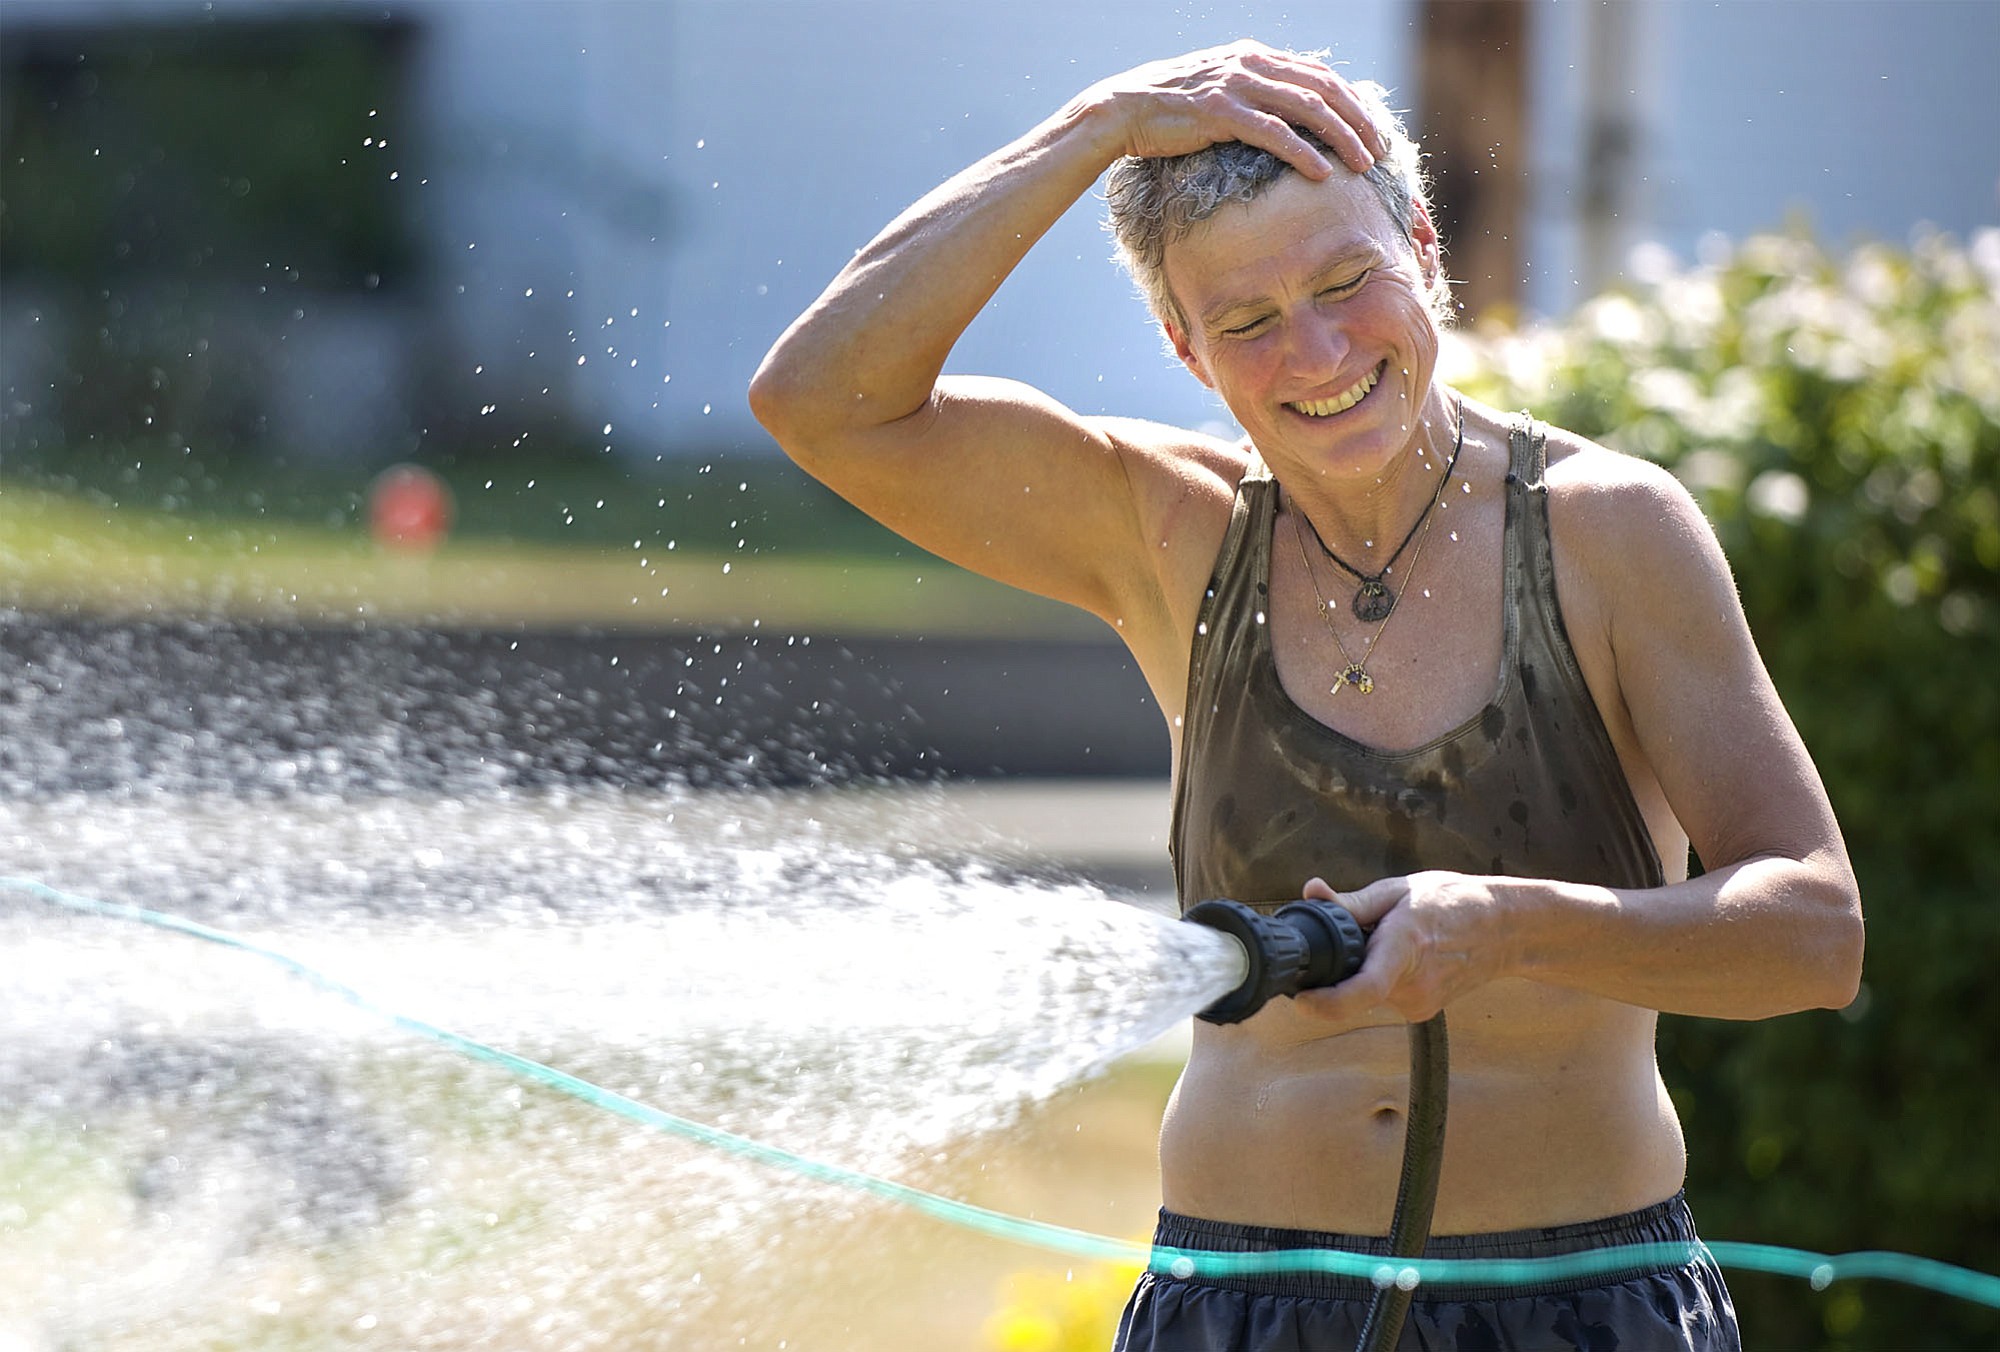 JR Ralston rubs water on her head as she waters her garden at her Felida home on Monday August 11, 2014.